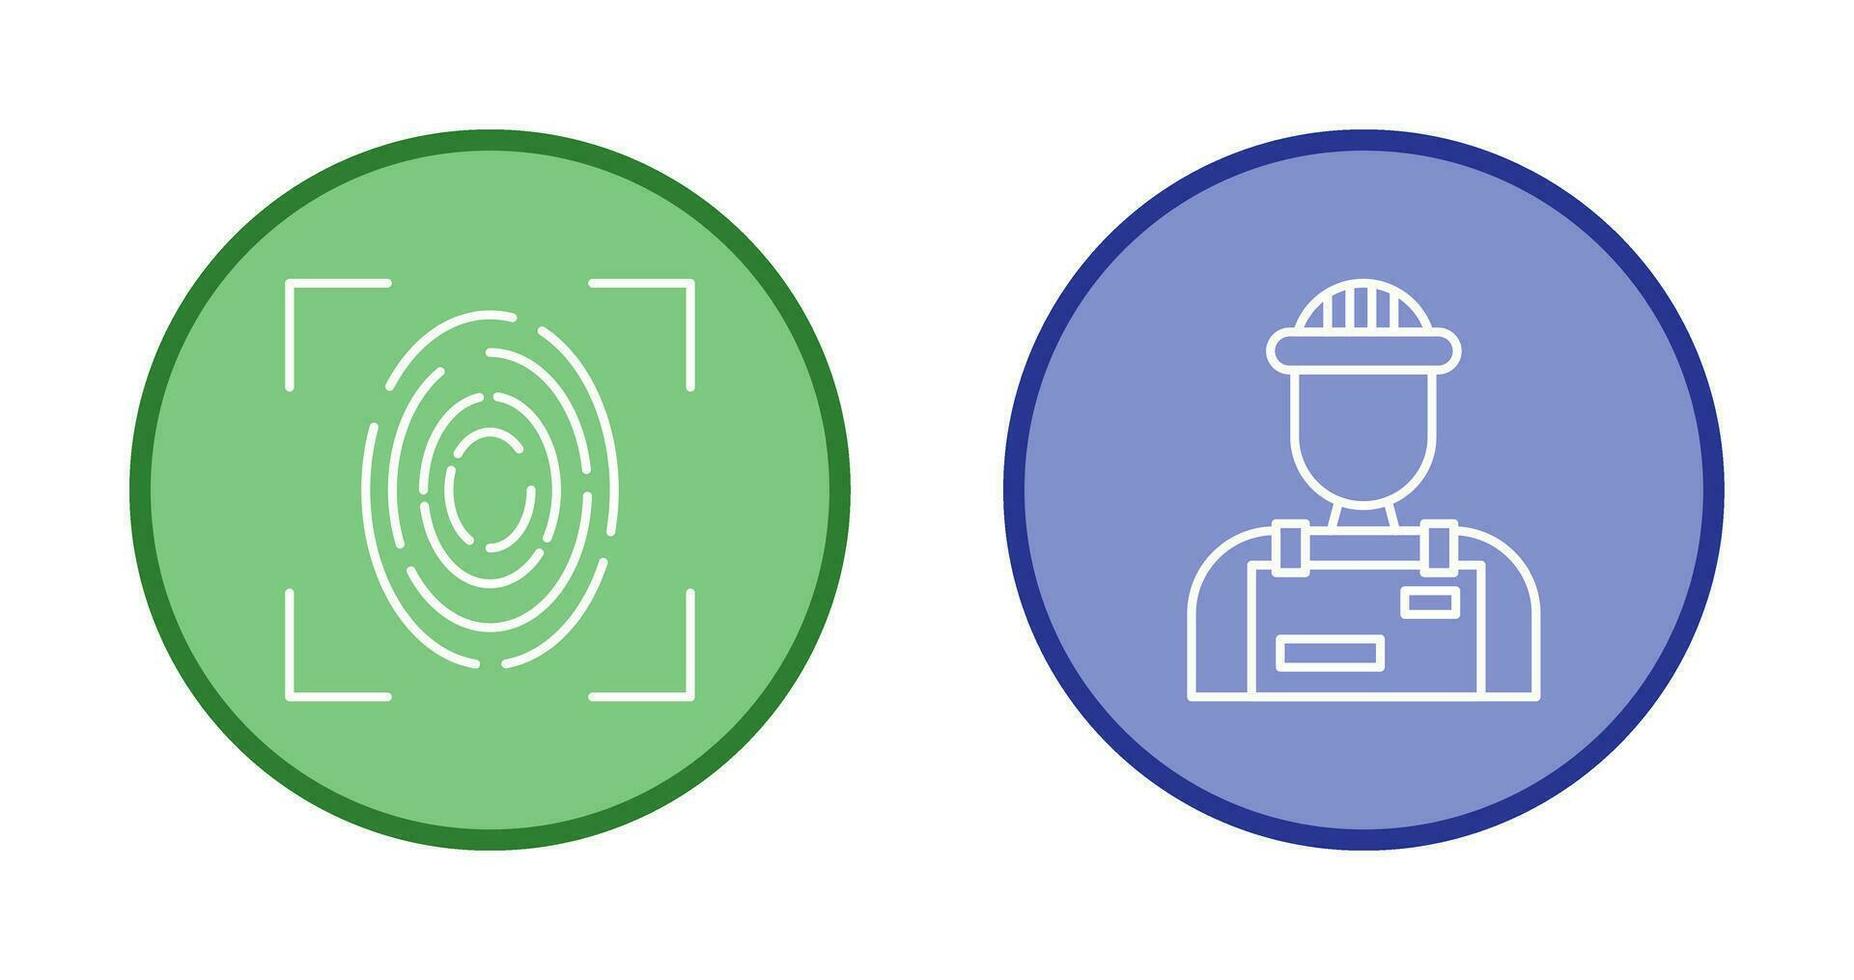 Fingerprint and Riot Police Icon vector